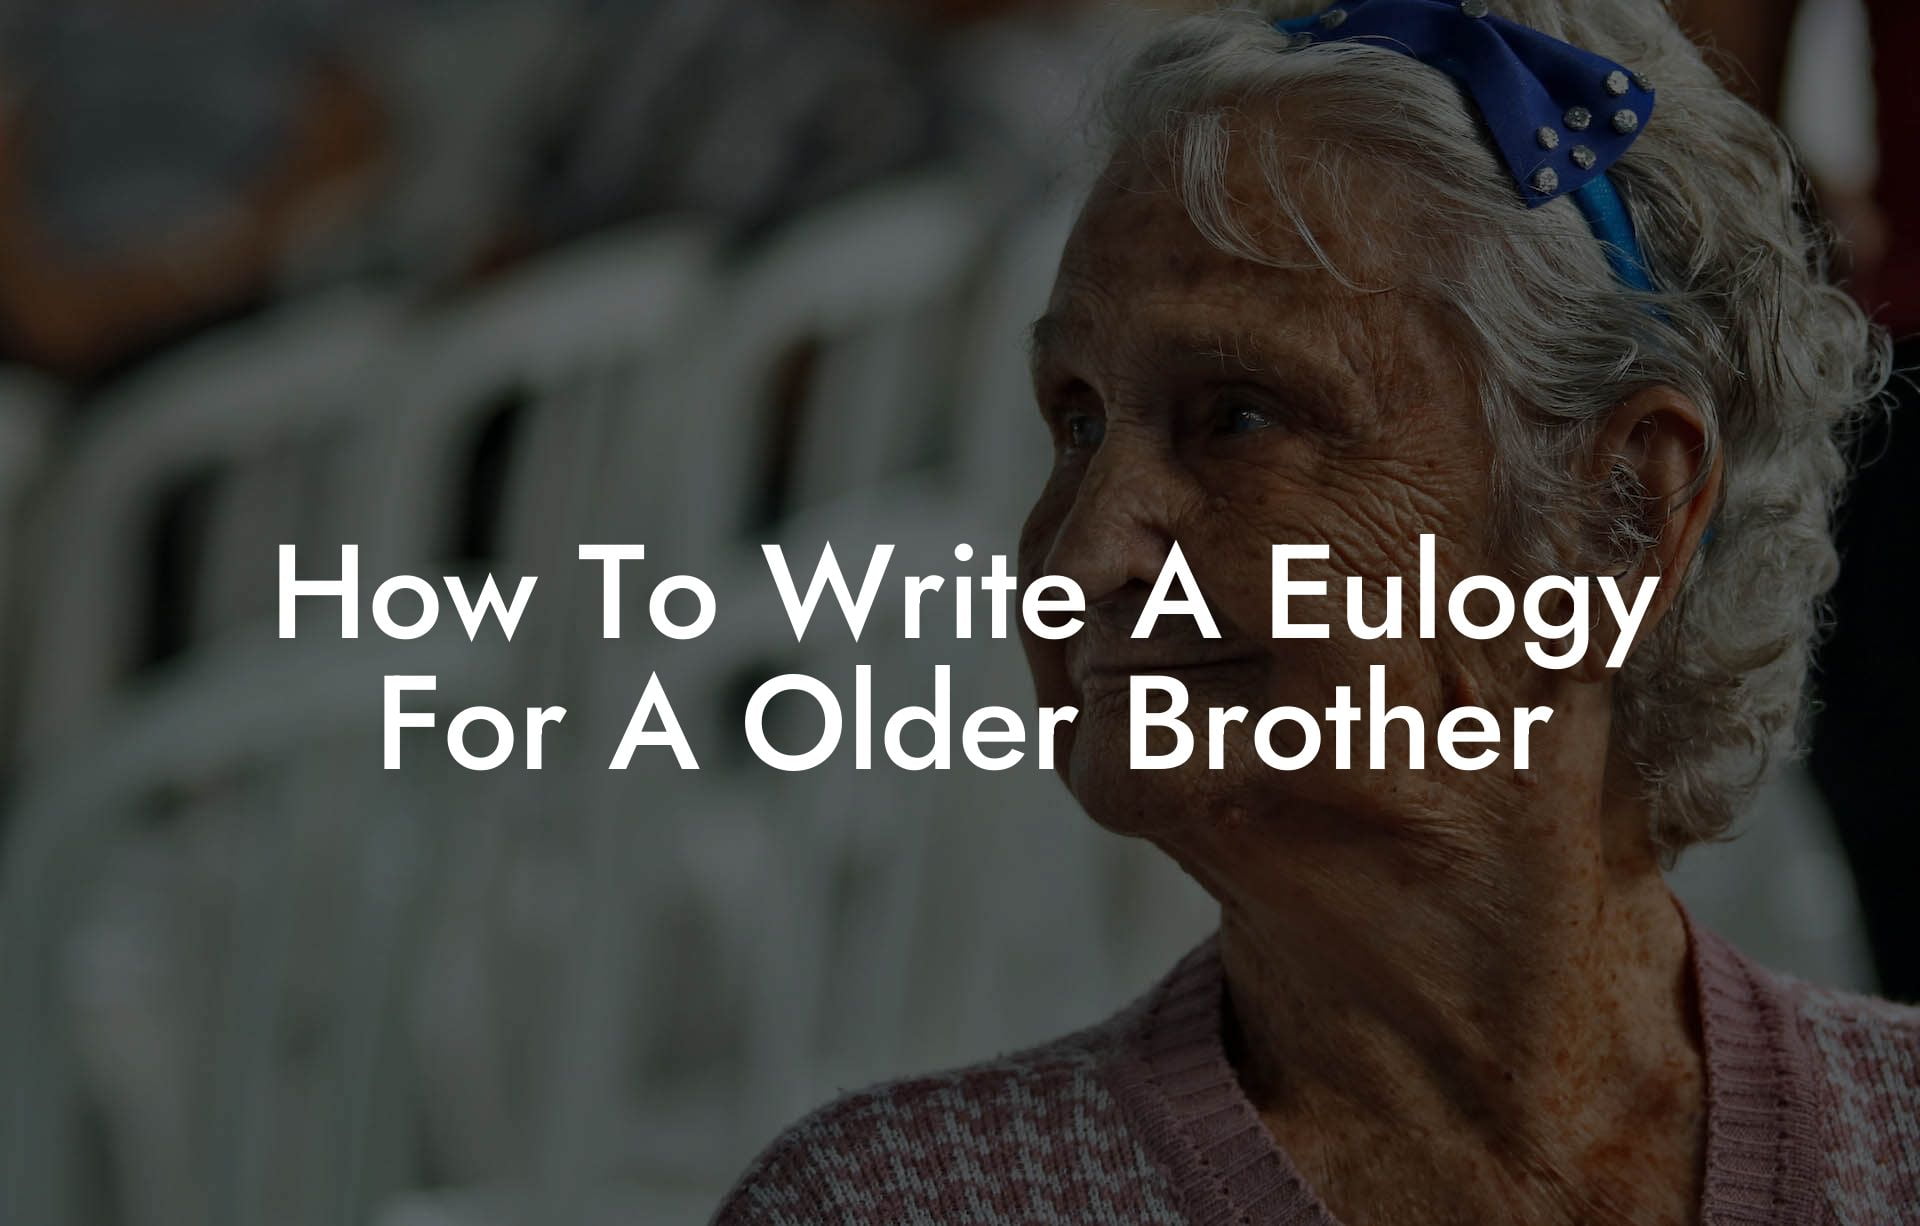 How To Write A Eulogy For A Older Brother